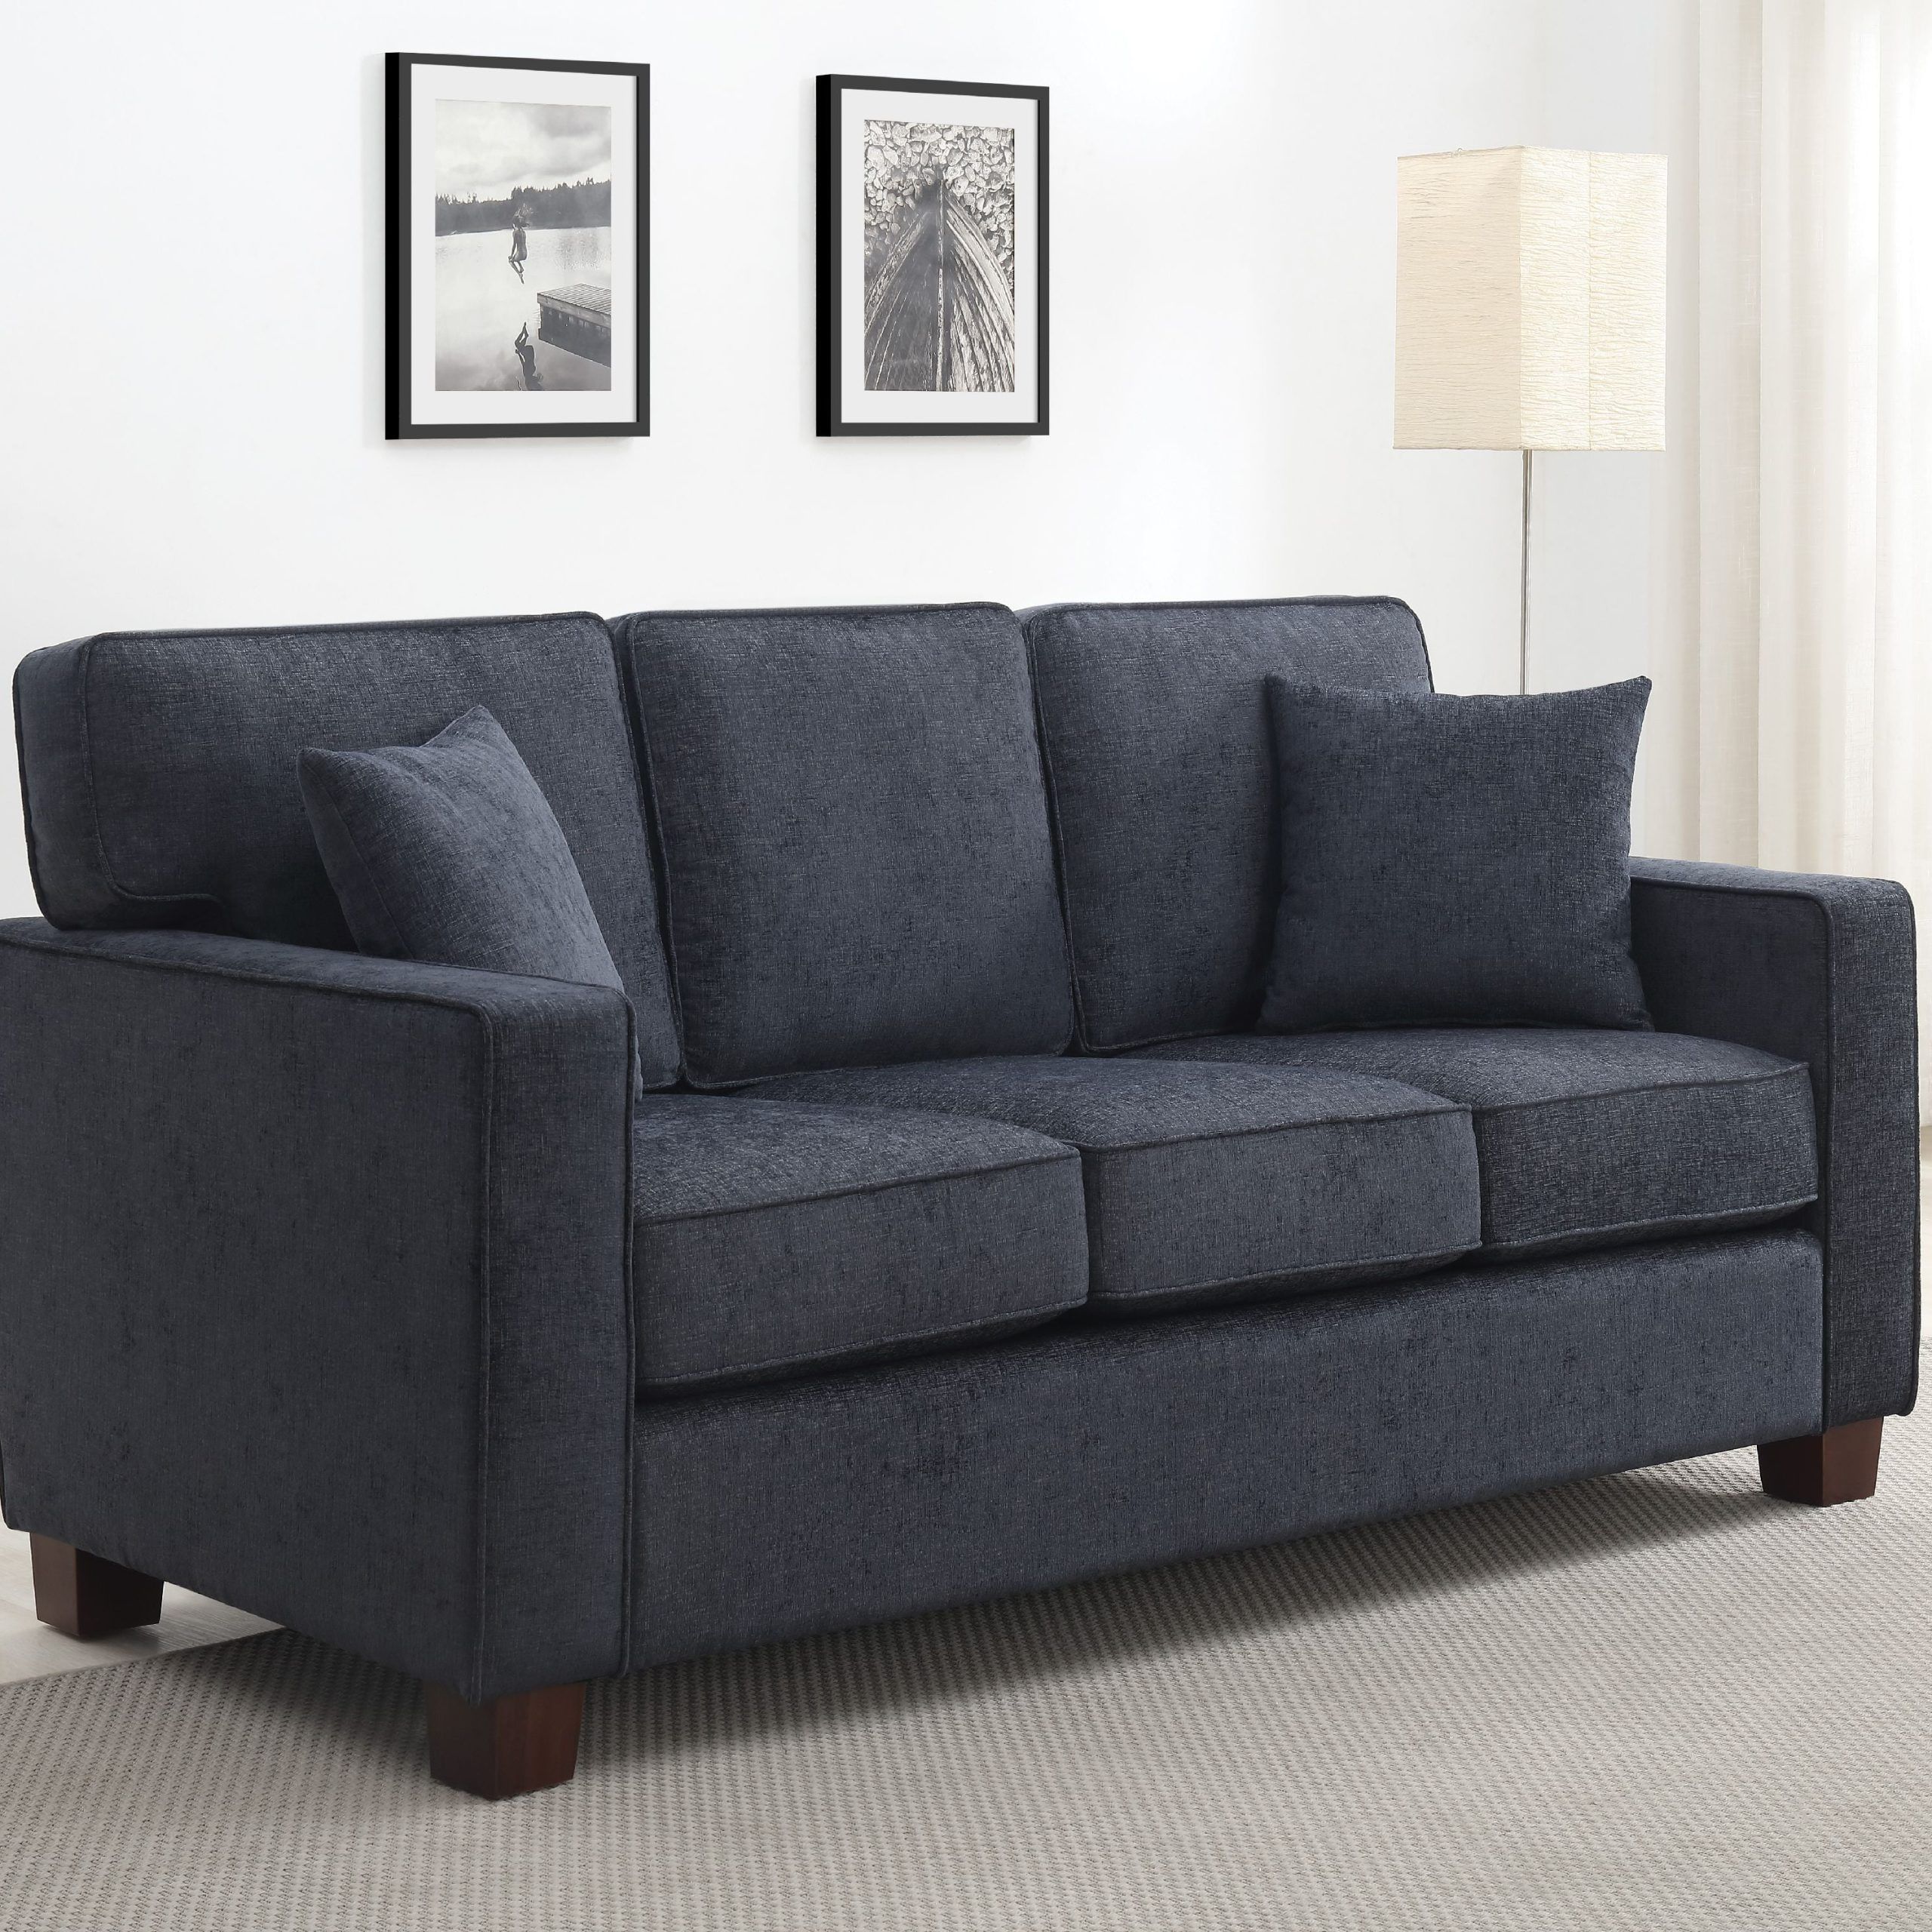 Osp Home Furnishings Russell 3 Seater Sofa In Navy Fabric 3/ctn Pertaining To Navy Linen Coil Sofas (View 10 of 20)